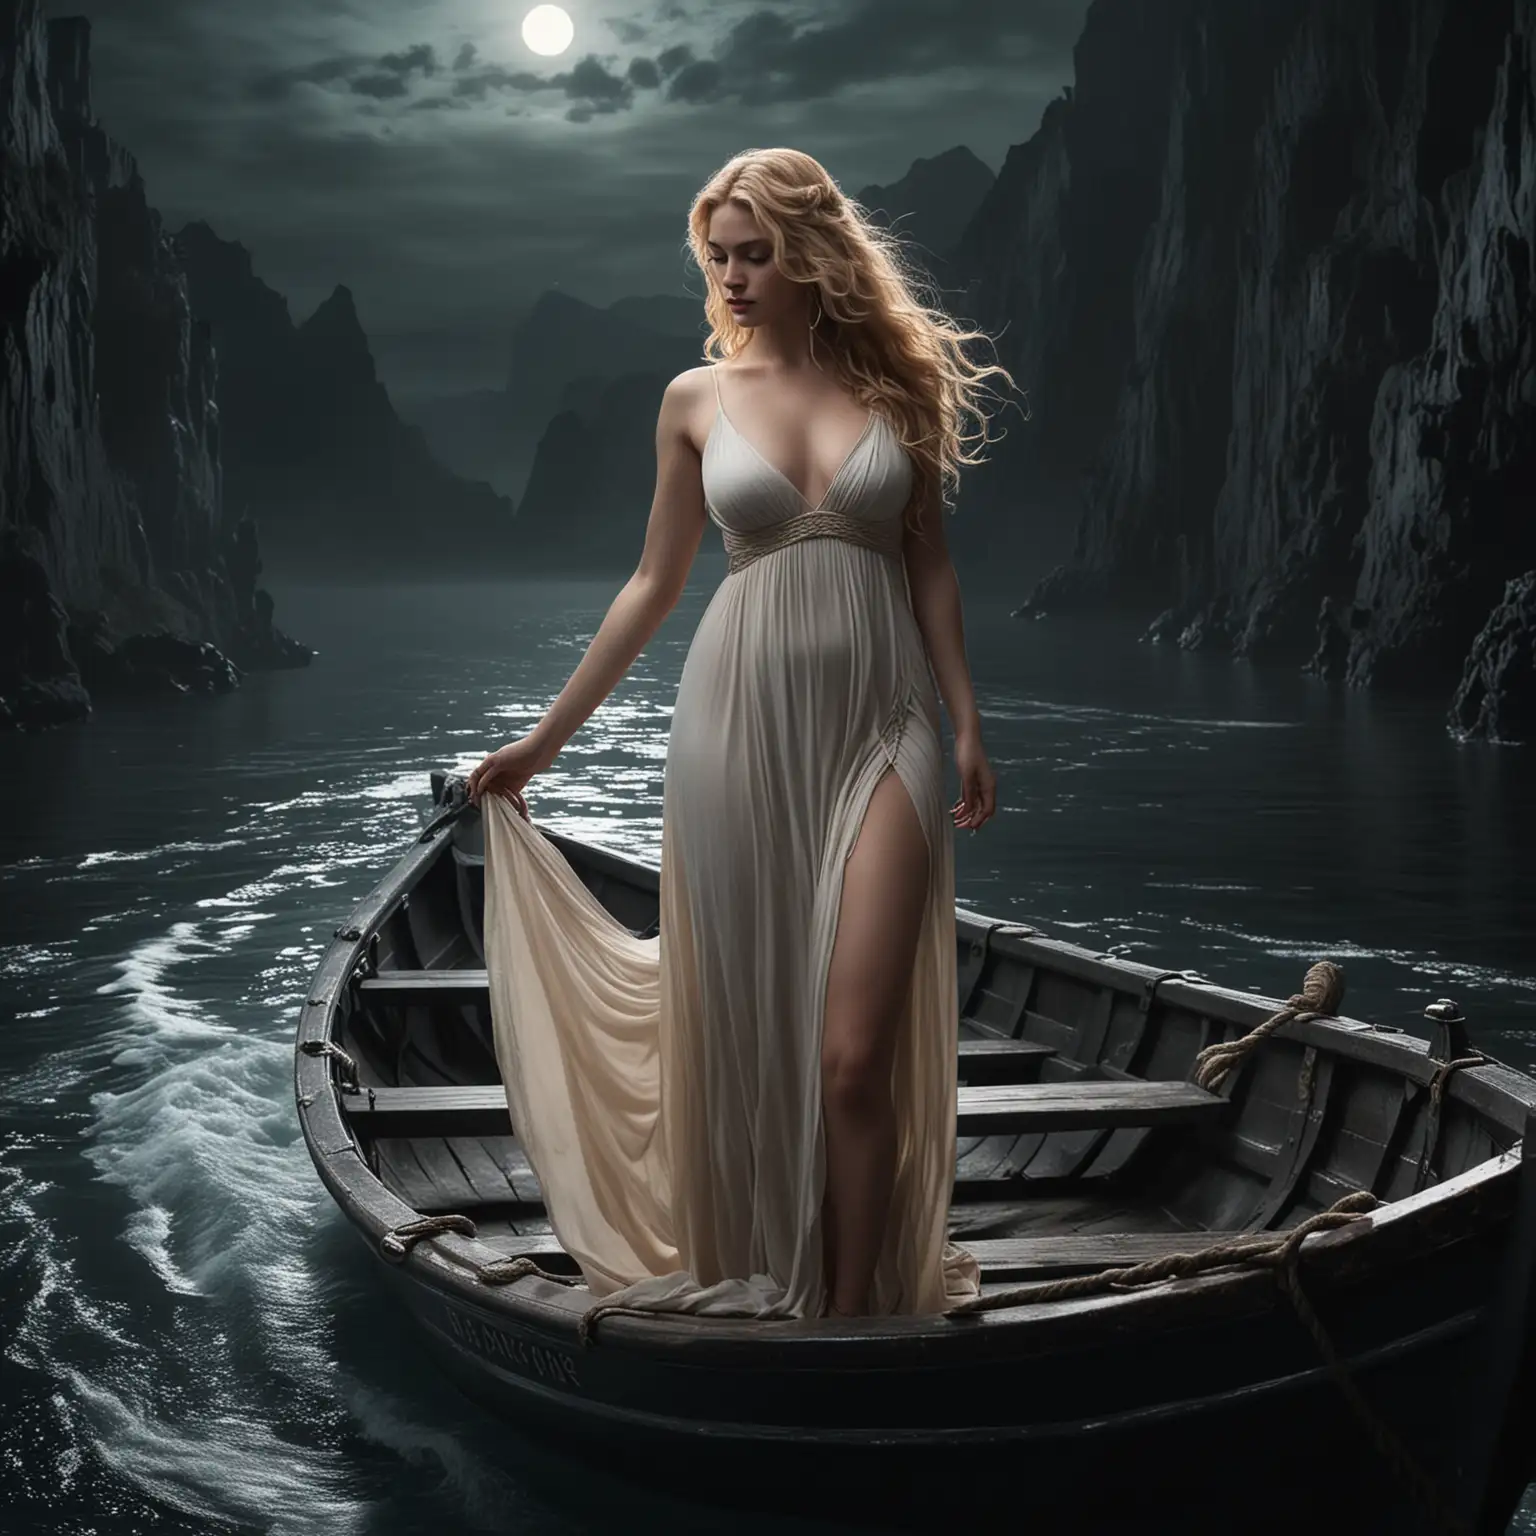 Persephone with blonde hair and a curvy figure on the boat of Charon crossing into the hades during a dark night of the soul